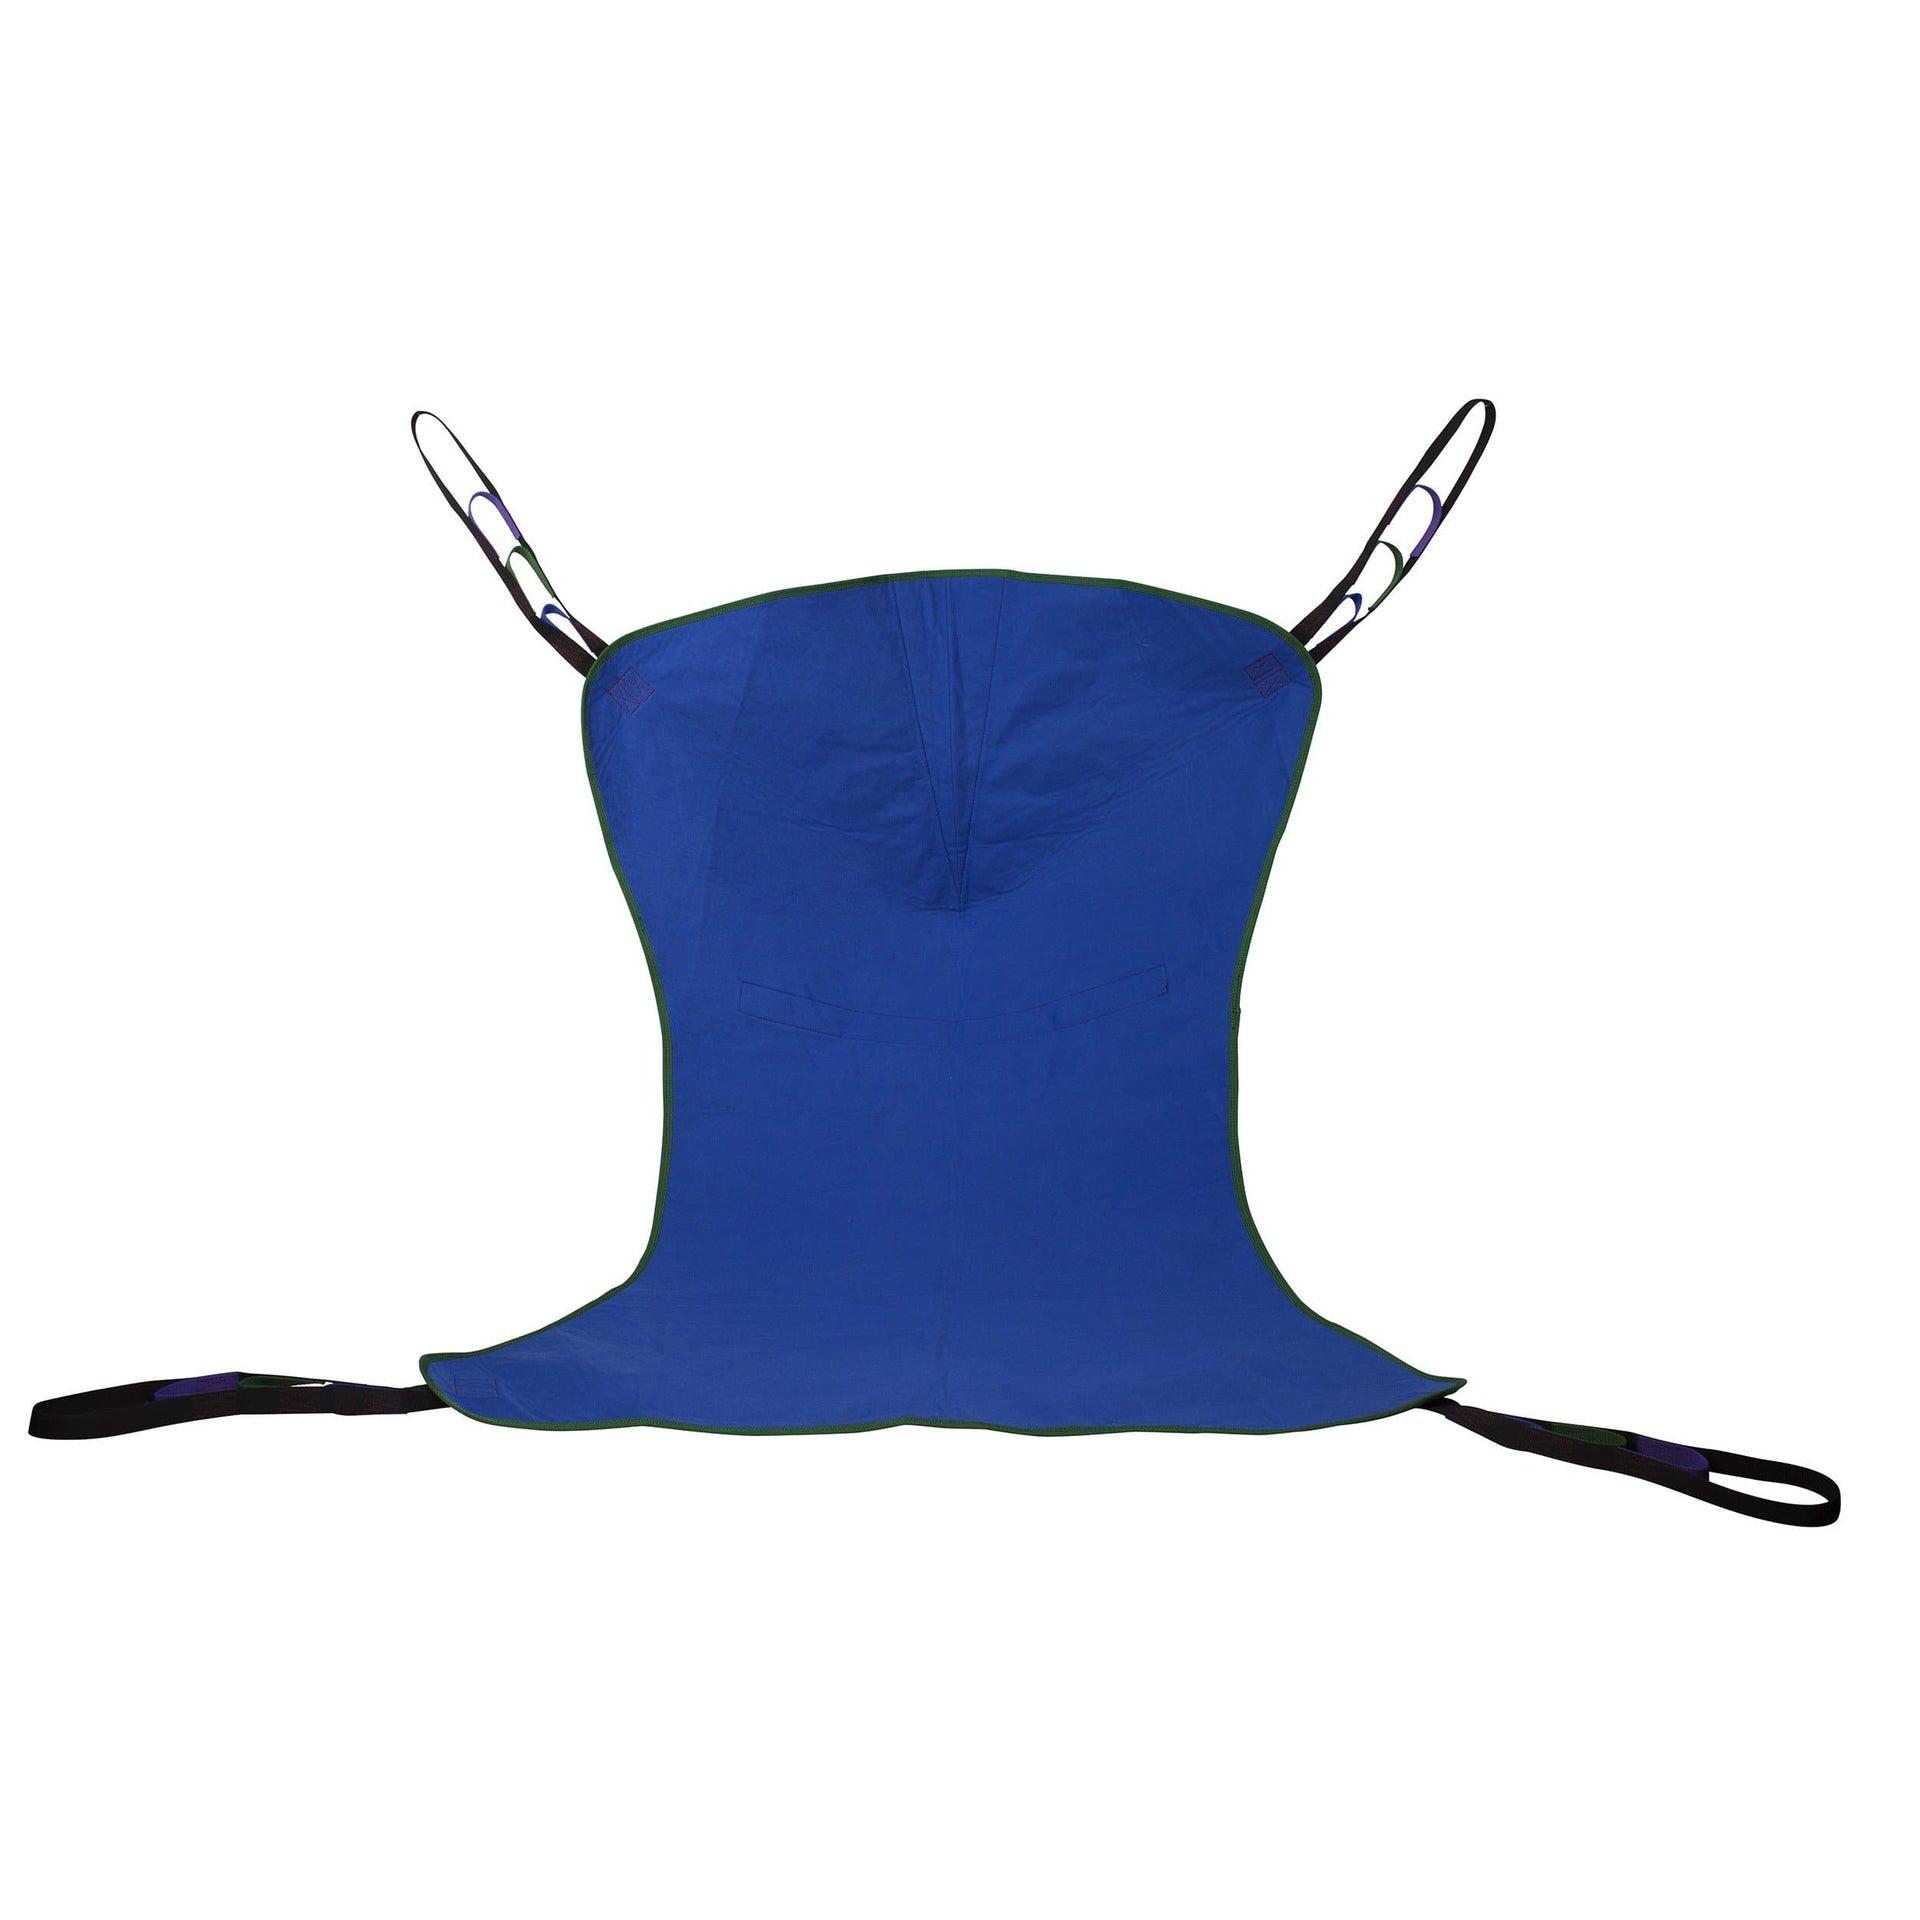 Dynarex Full Body Solid Fabric Sling For Patient Lifts - Senior.com Slings